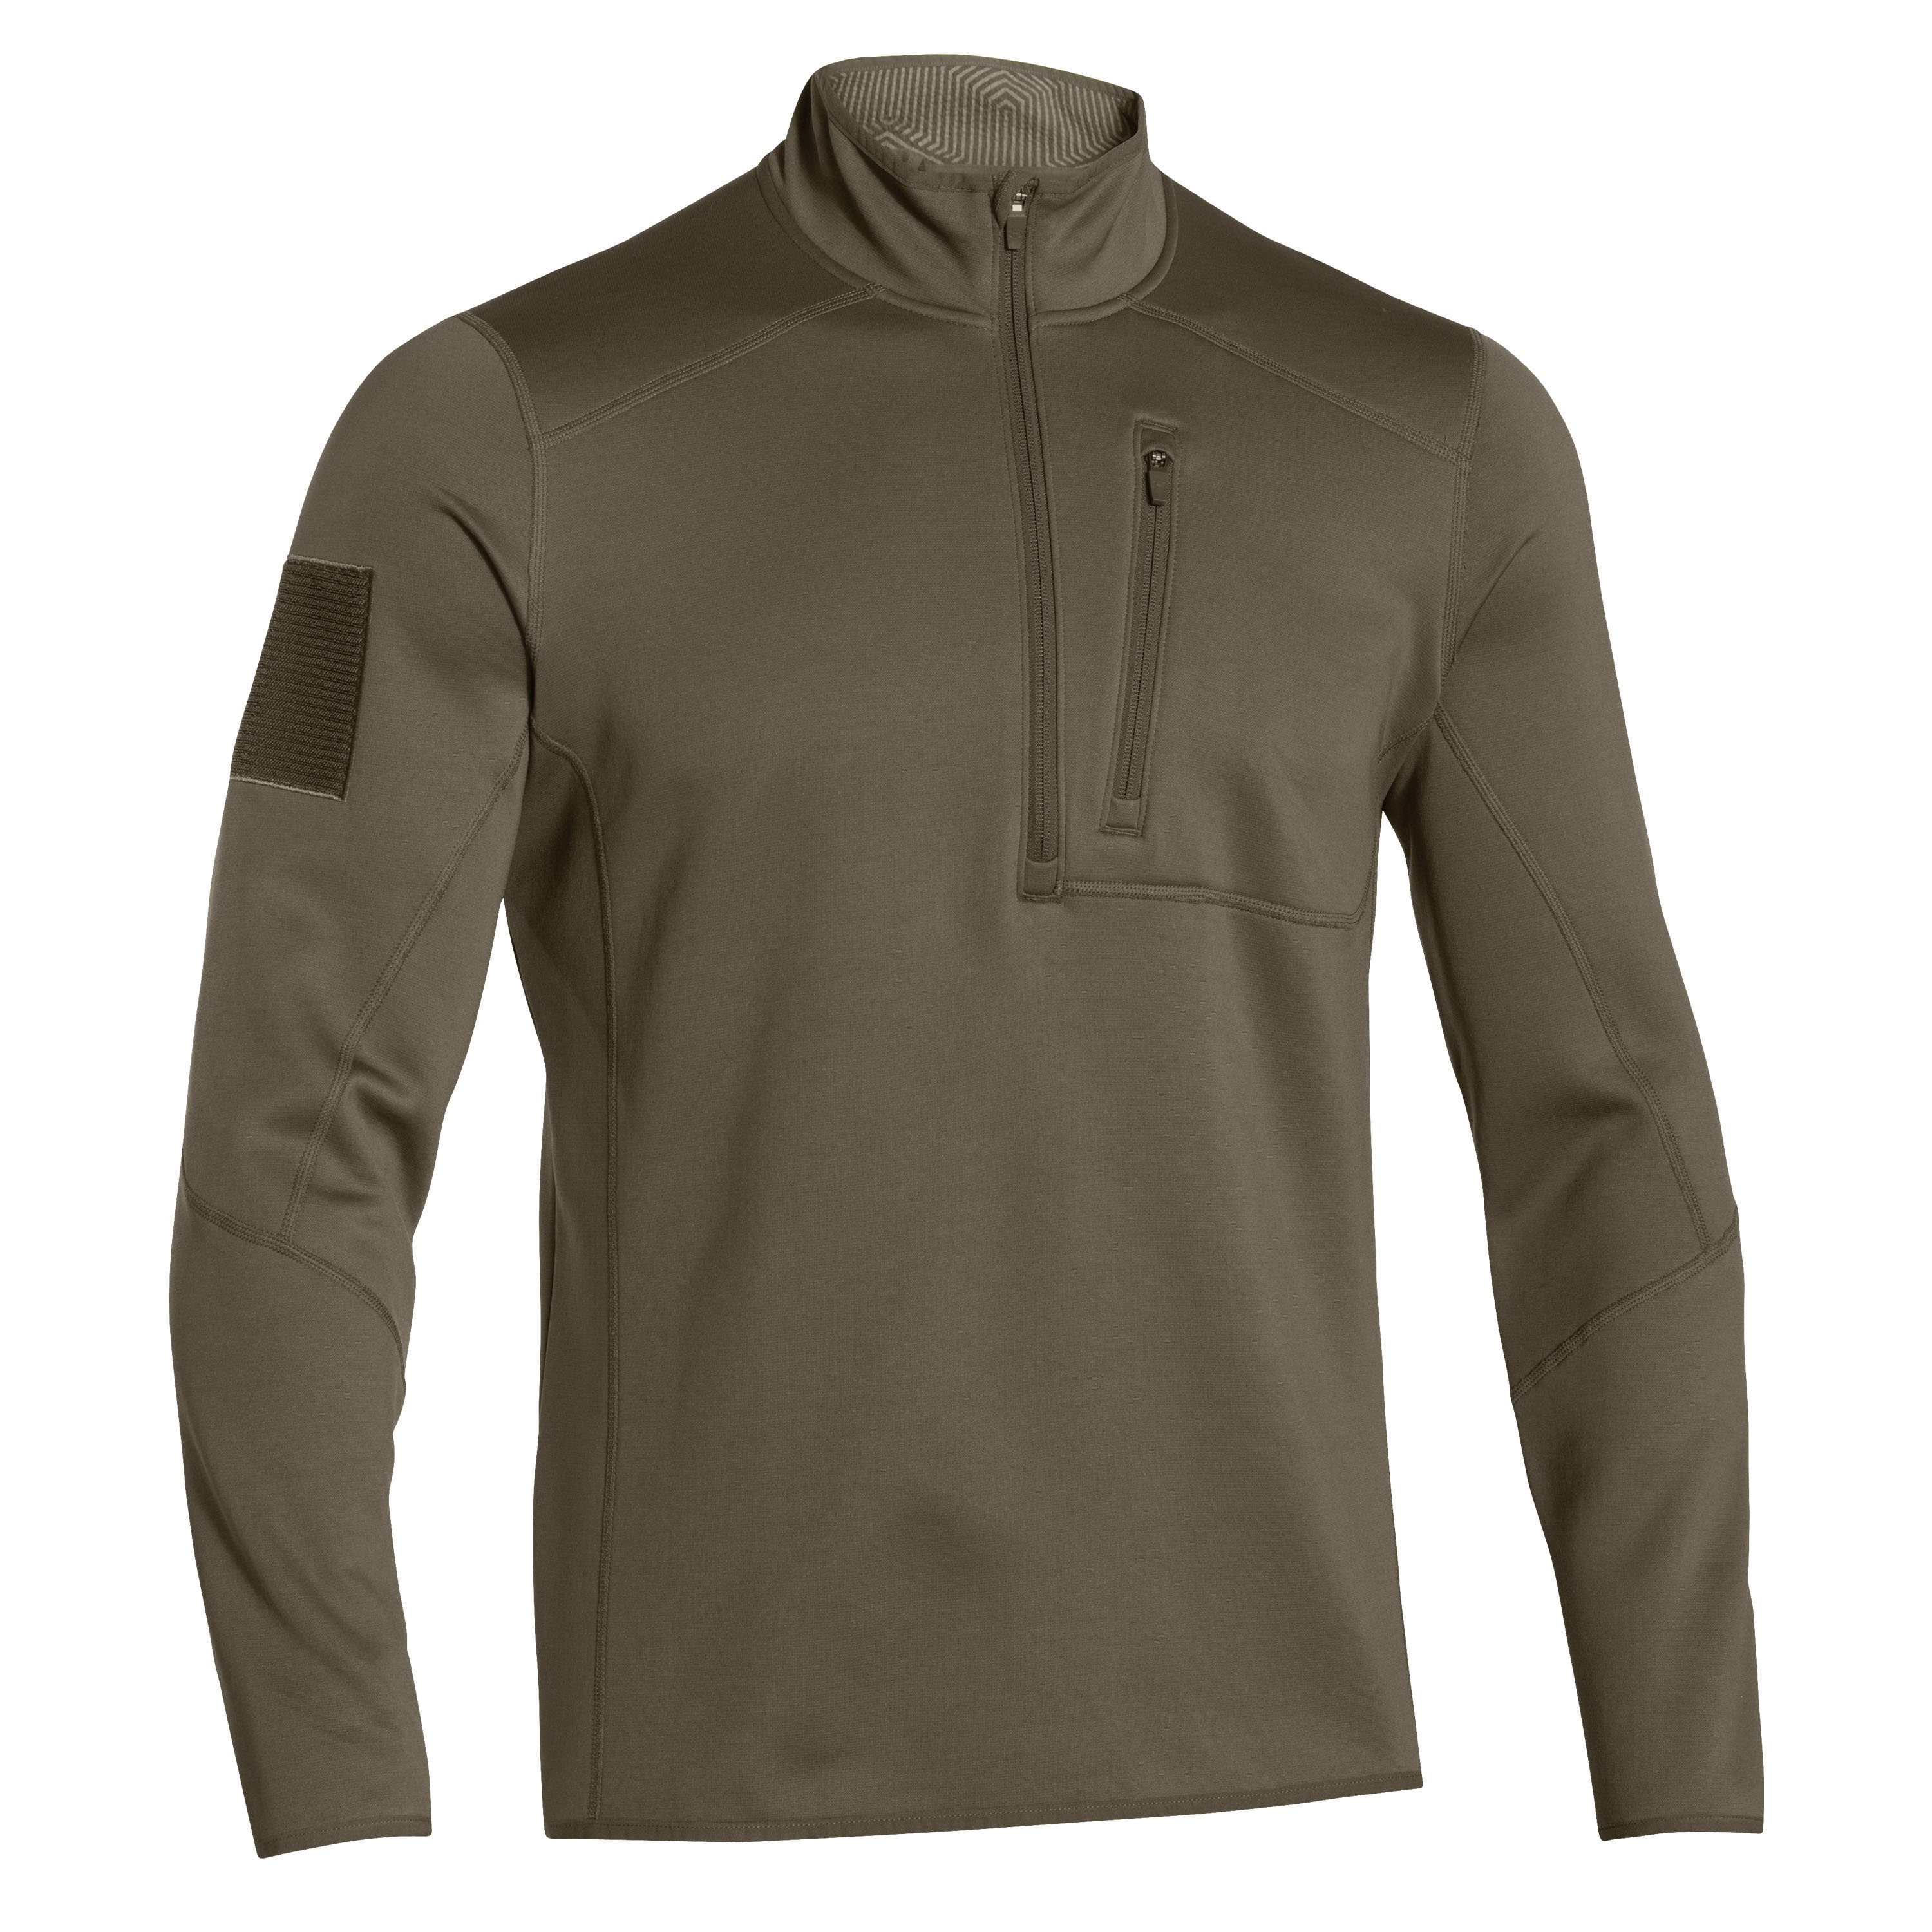 Under Armour Long Arm Shirt Tactical ColdGear Infrared olive